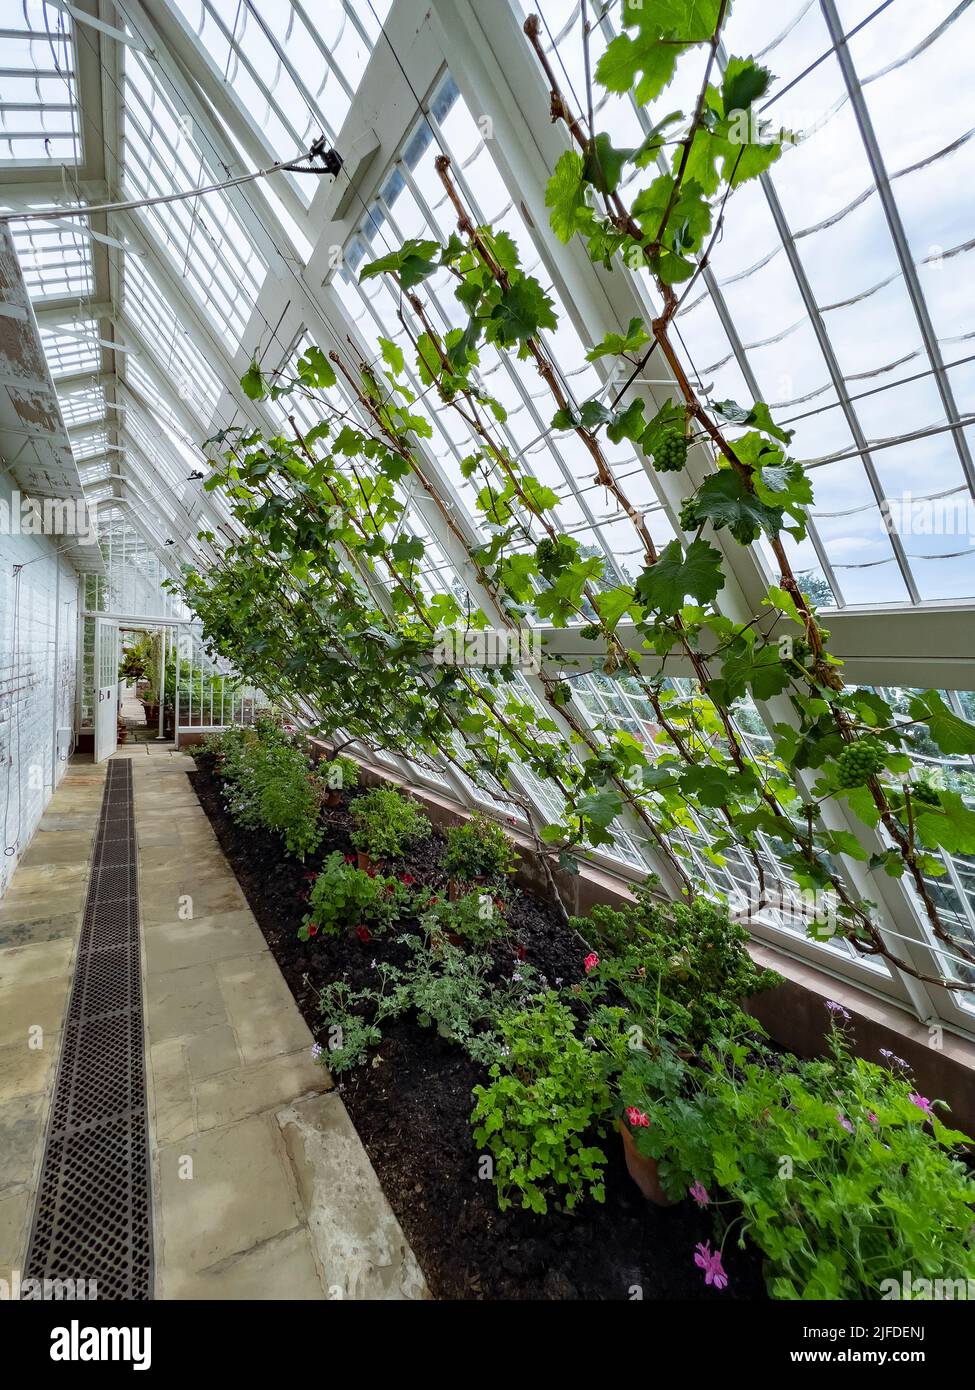 Gardening - potted plants and vines growing inside a wood frame greenhouse in an English country garden. Stock Photo